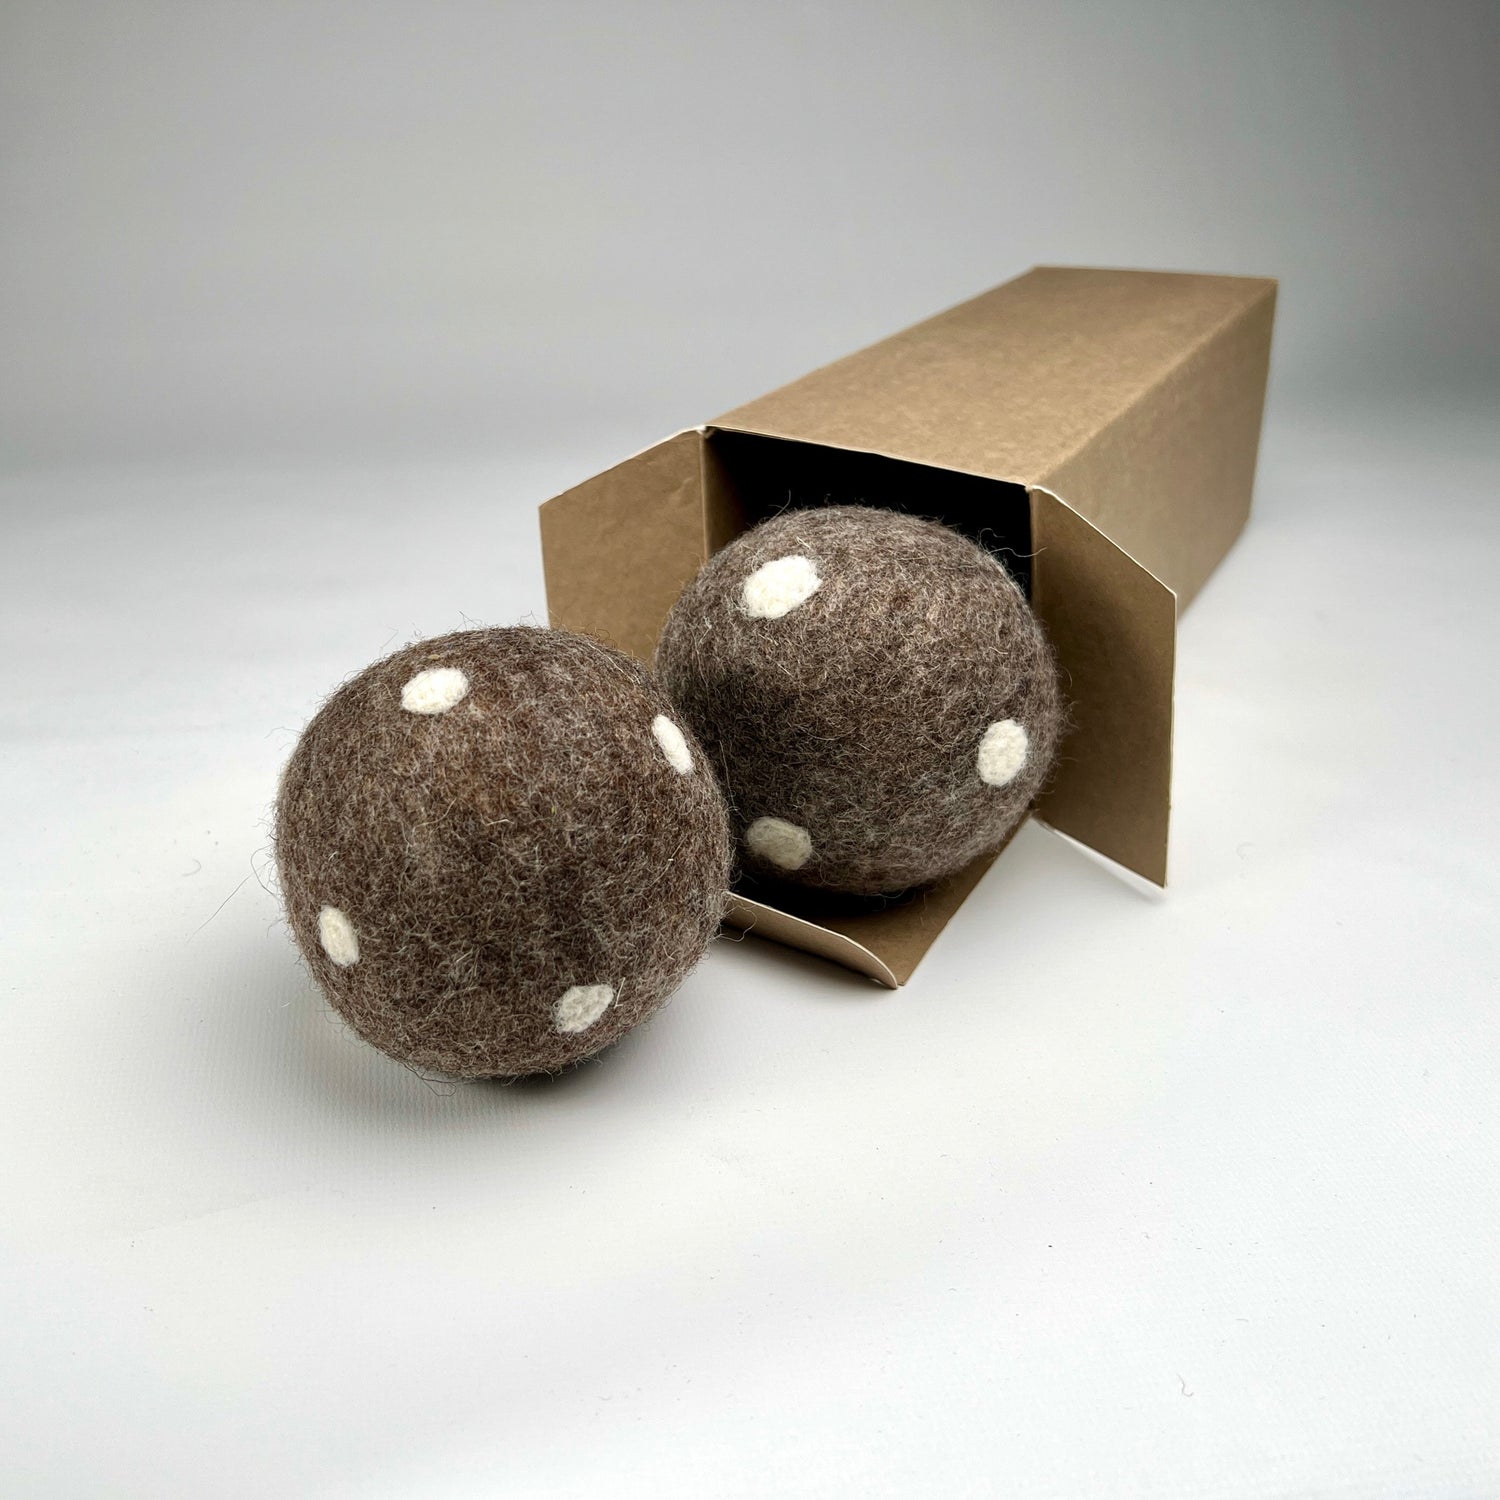 Dog Toys - two felt balls in a box, brown / neutral colour indoor soft dog catch balls with white polka dots